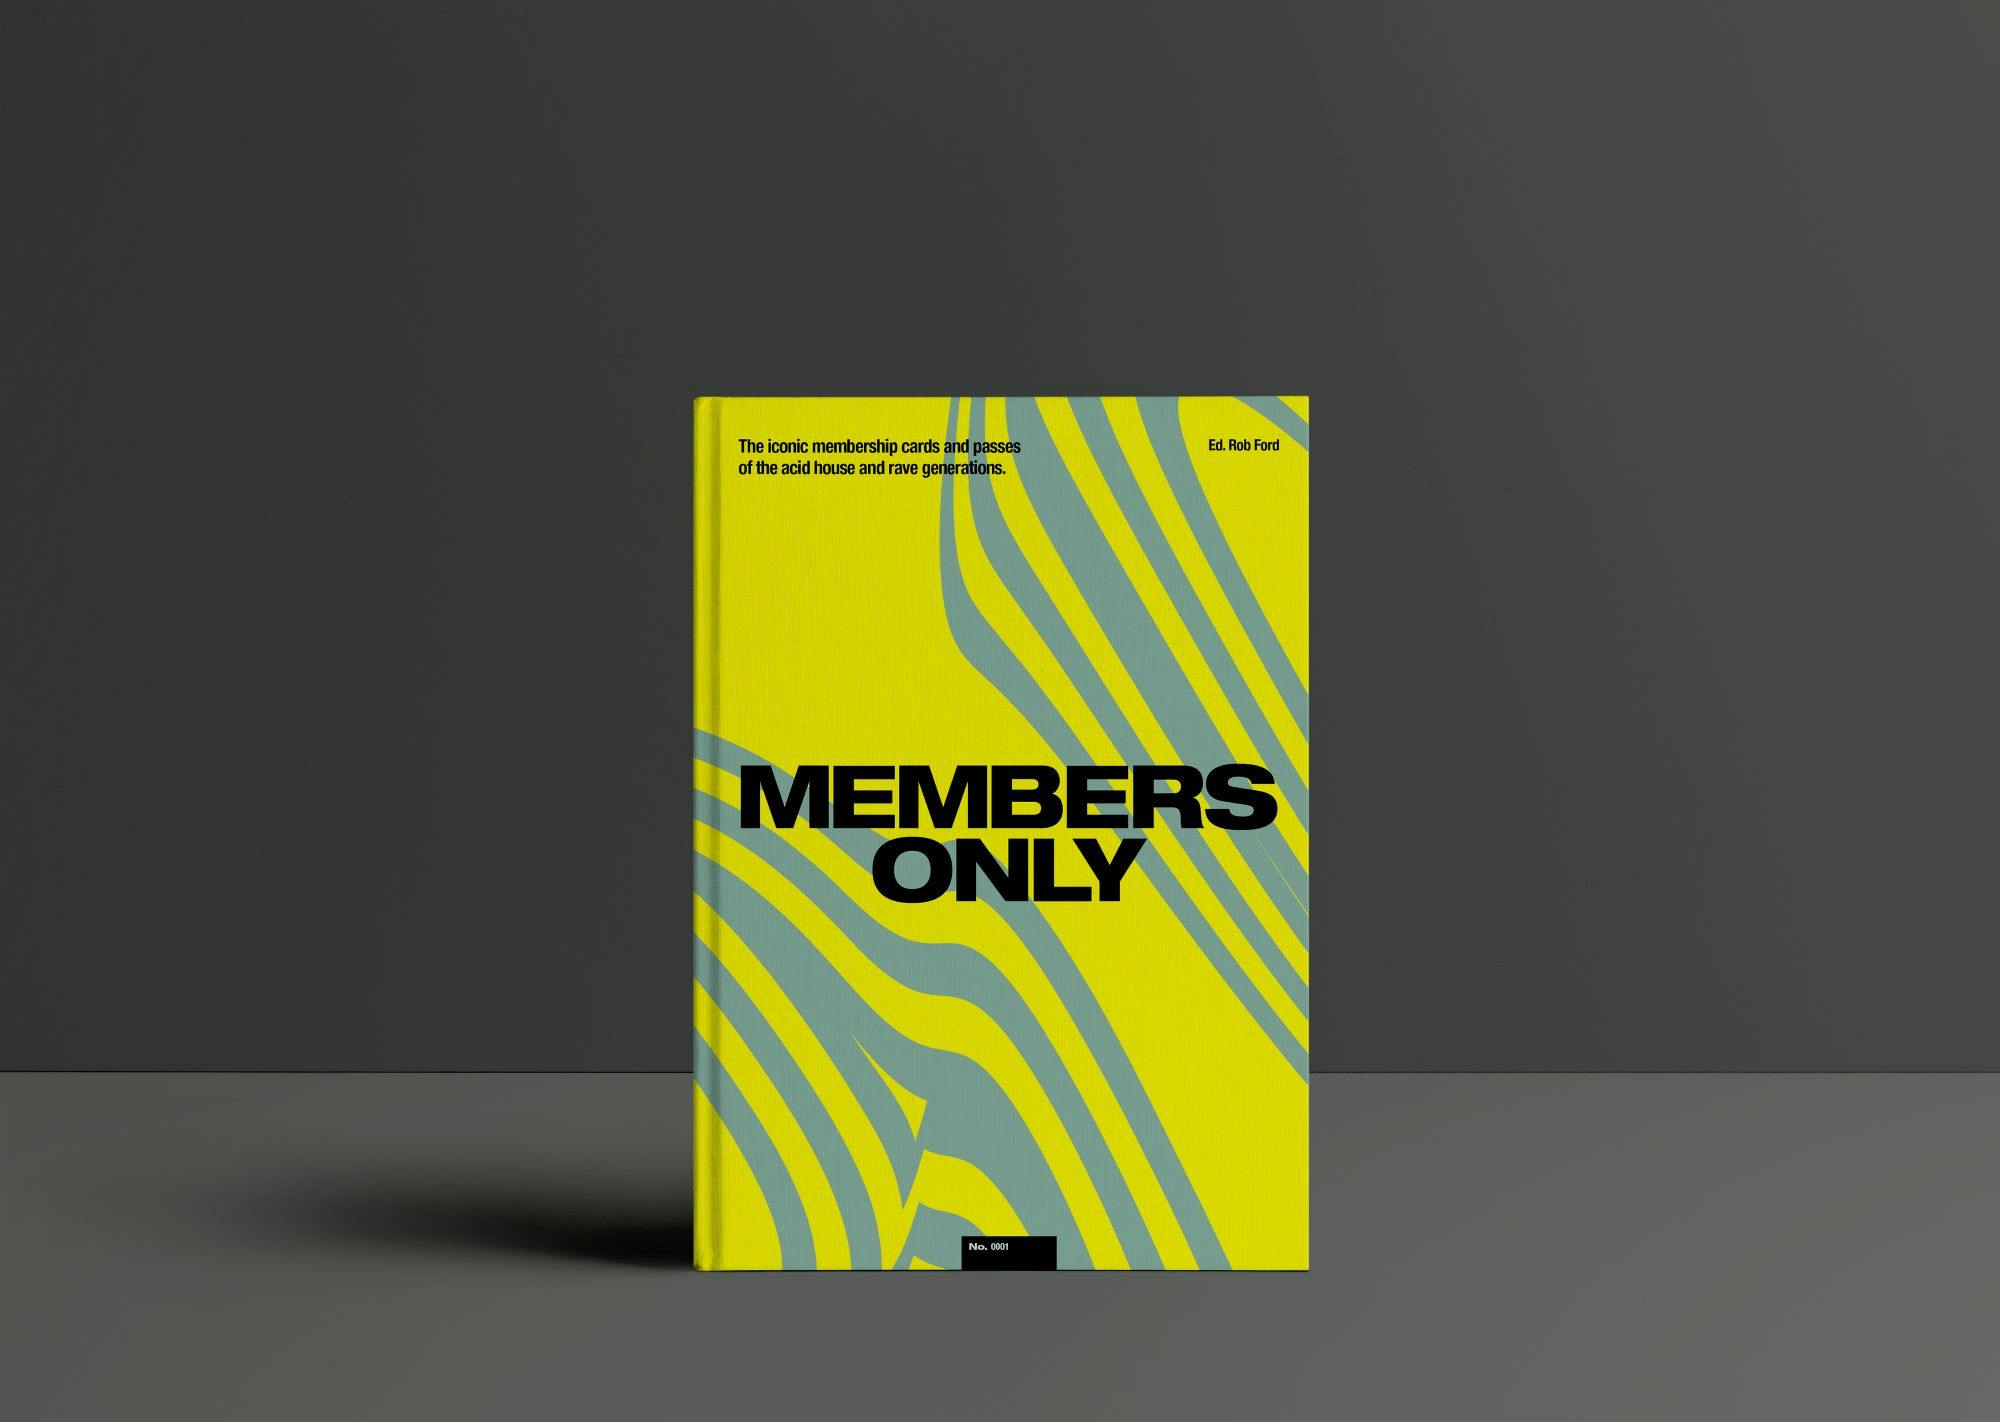 https://creativereview.imgix.net/content/uploads/2022/05/RAVE_Memberships_Book_Design_Mockup_Cover_3A_FrontCover.jpg